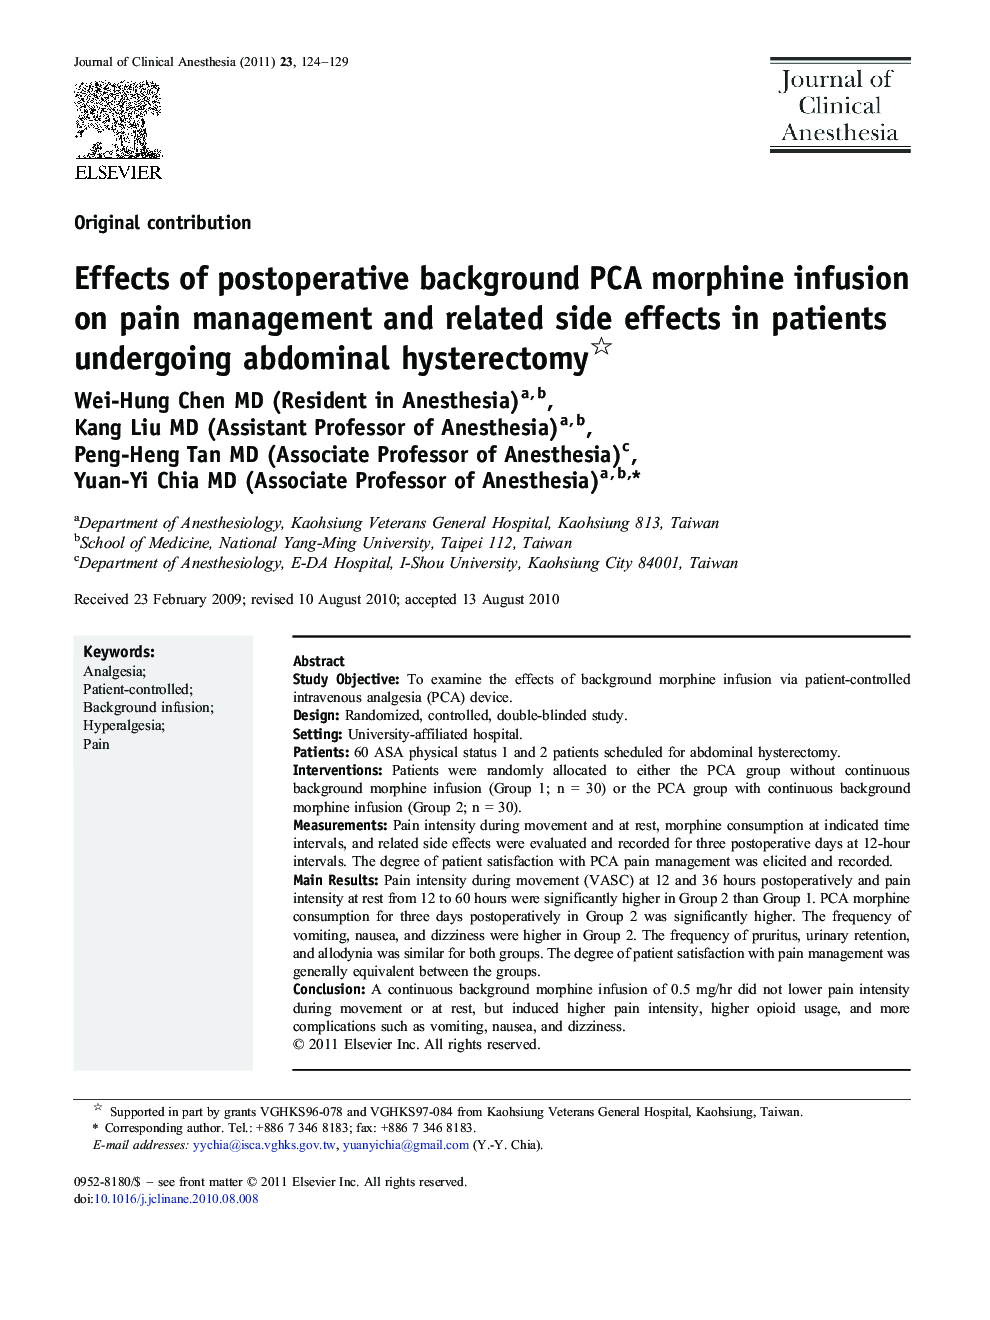 Effects of postoperative background PCA morphine infusion on pain management and related side effects in patients undergoing abdominal hysterectomy 